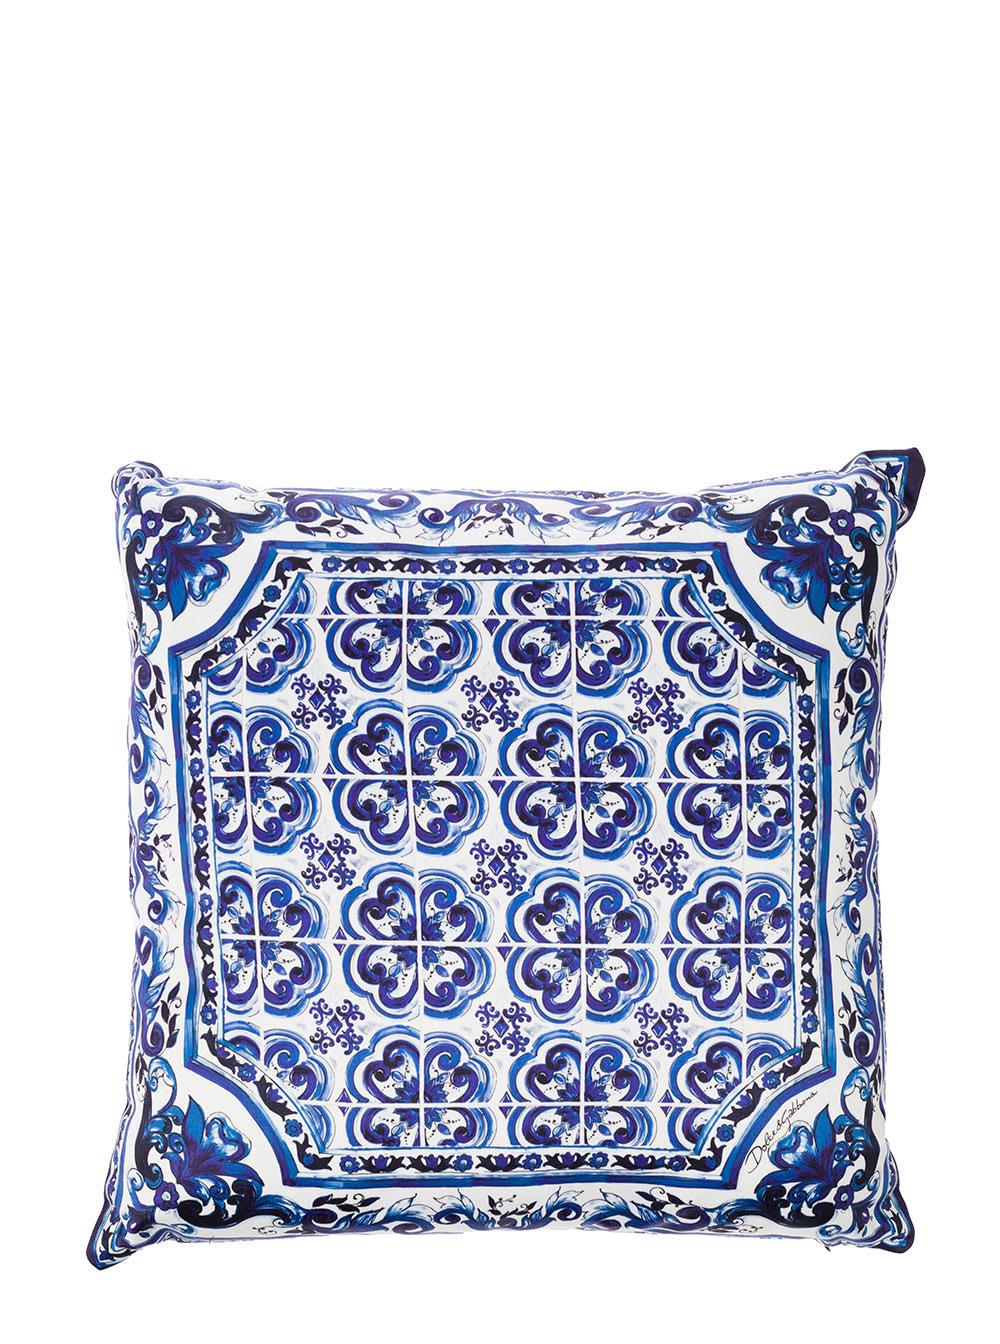 Dolce & Gabbana Blue And White Small Cushion With Blue Mediterranean Print In Duchesse Cotton